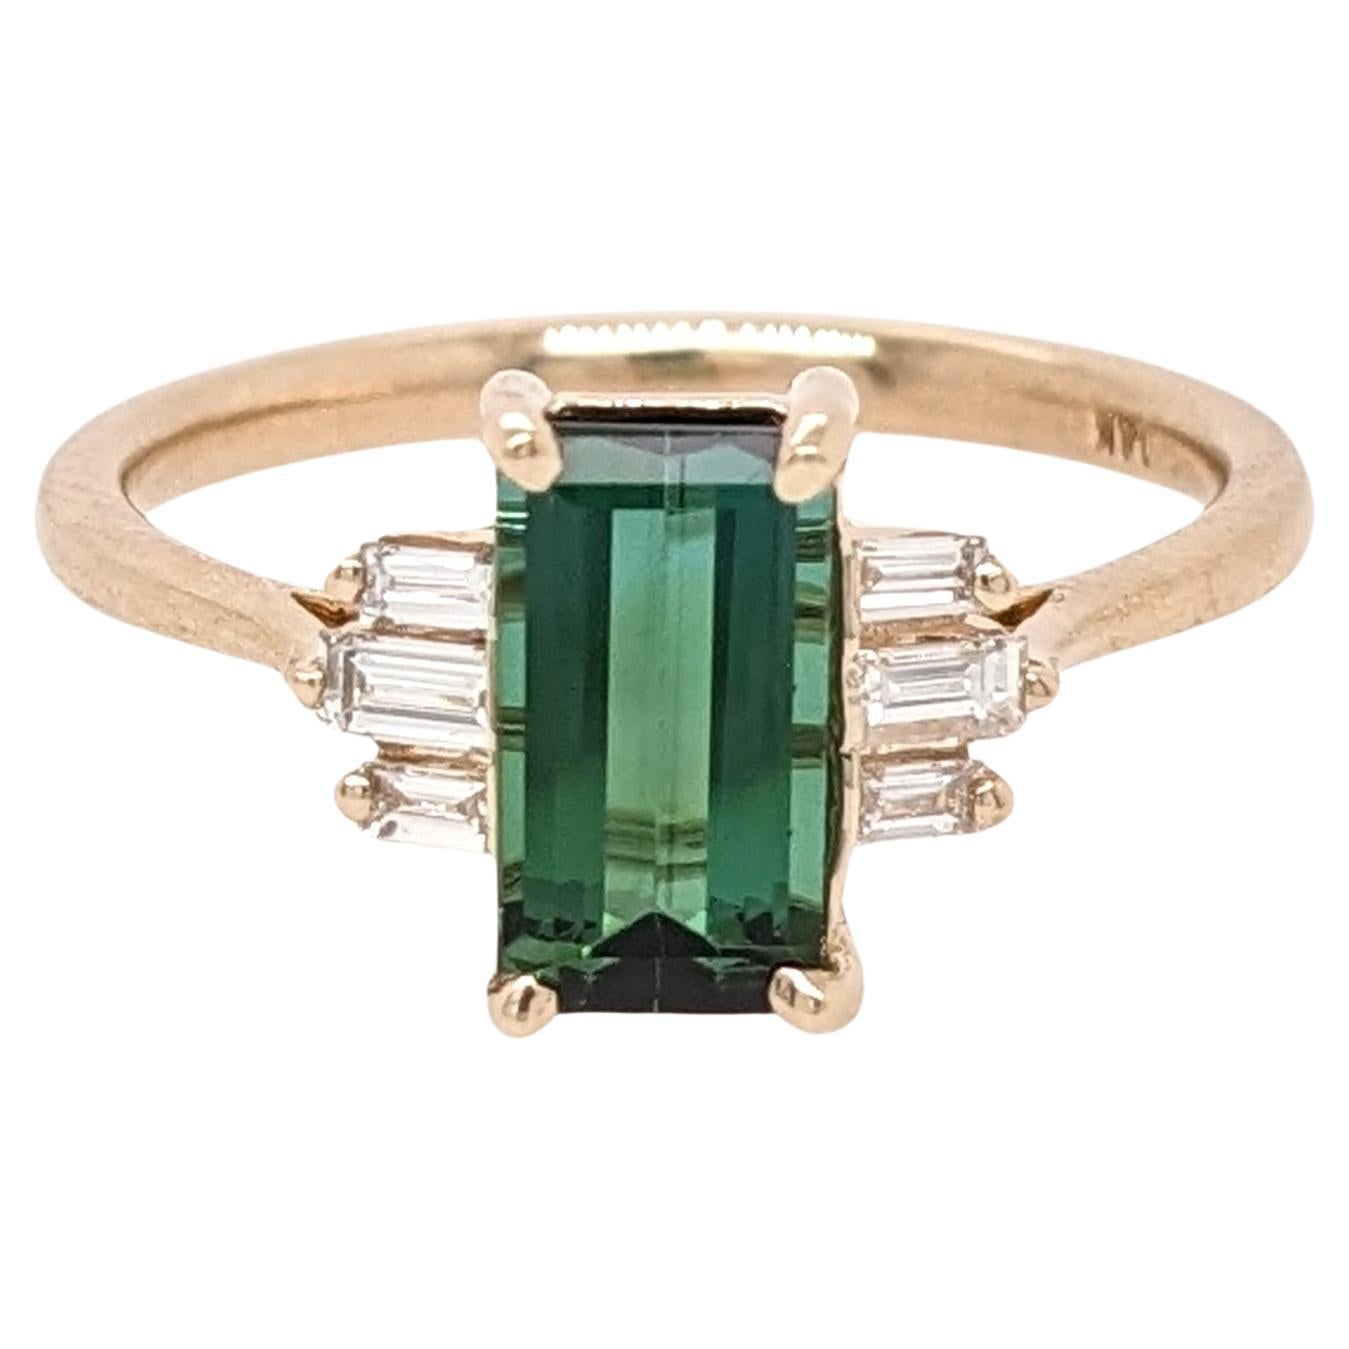 1.2ct Tourmaline Ring w Diamond Accents in 14K Solid Yellow Gold Emerald 9x5mm